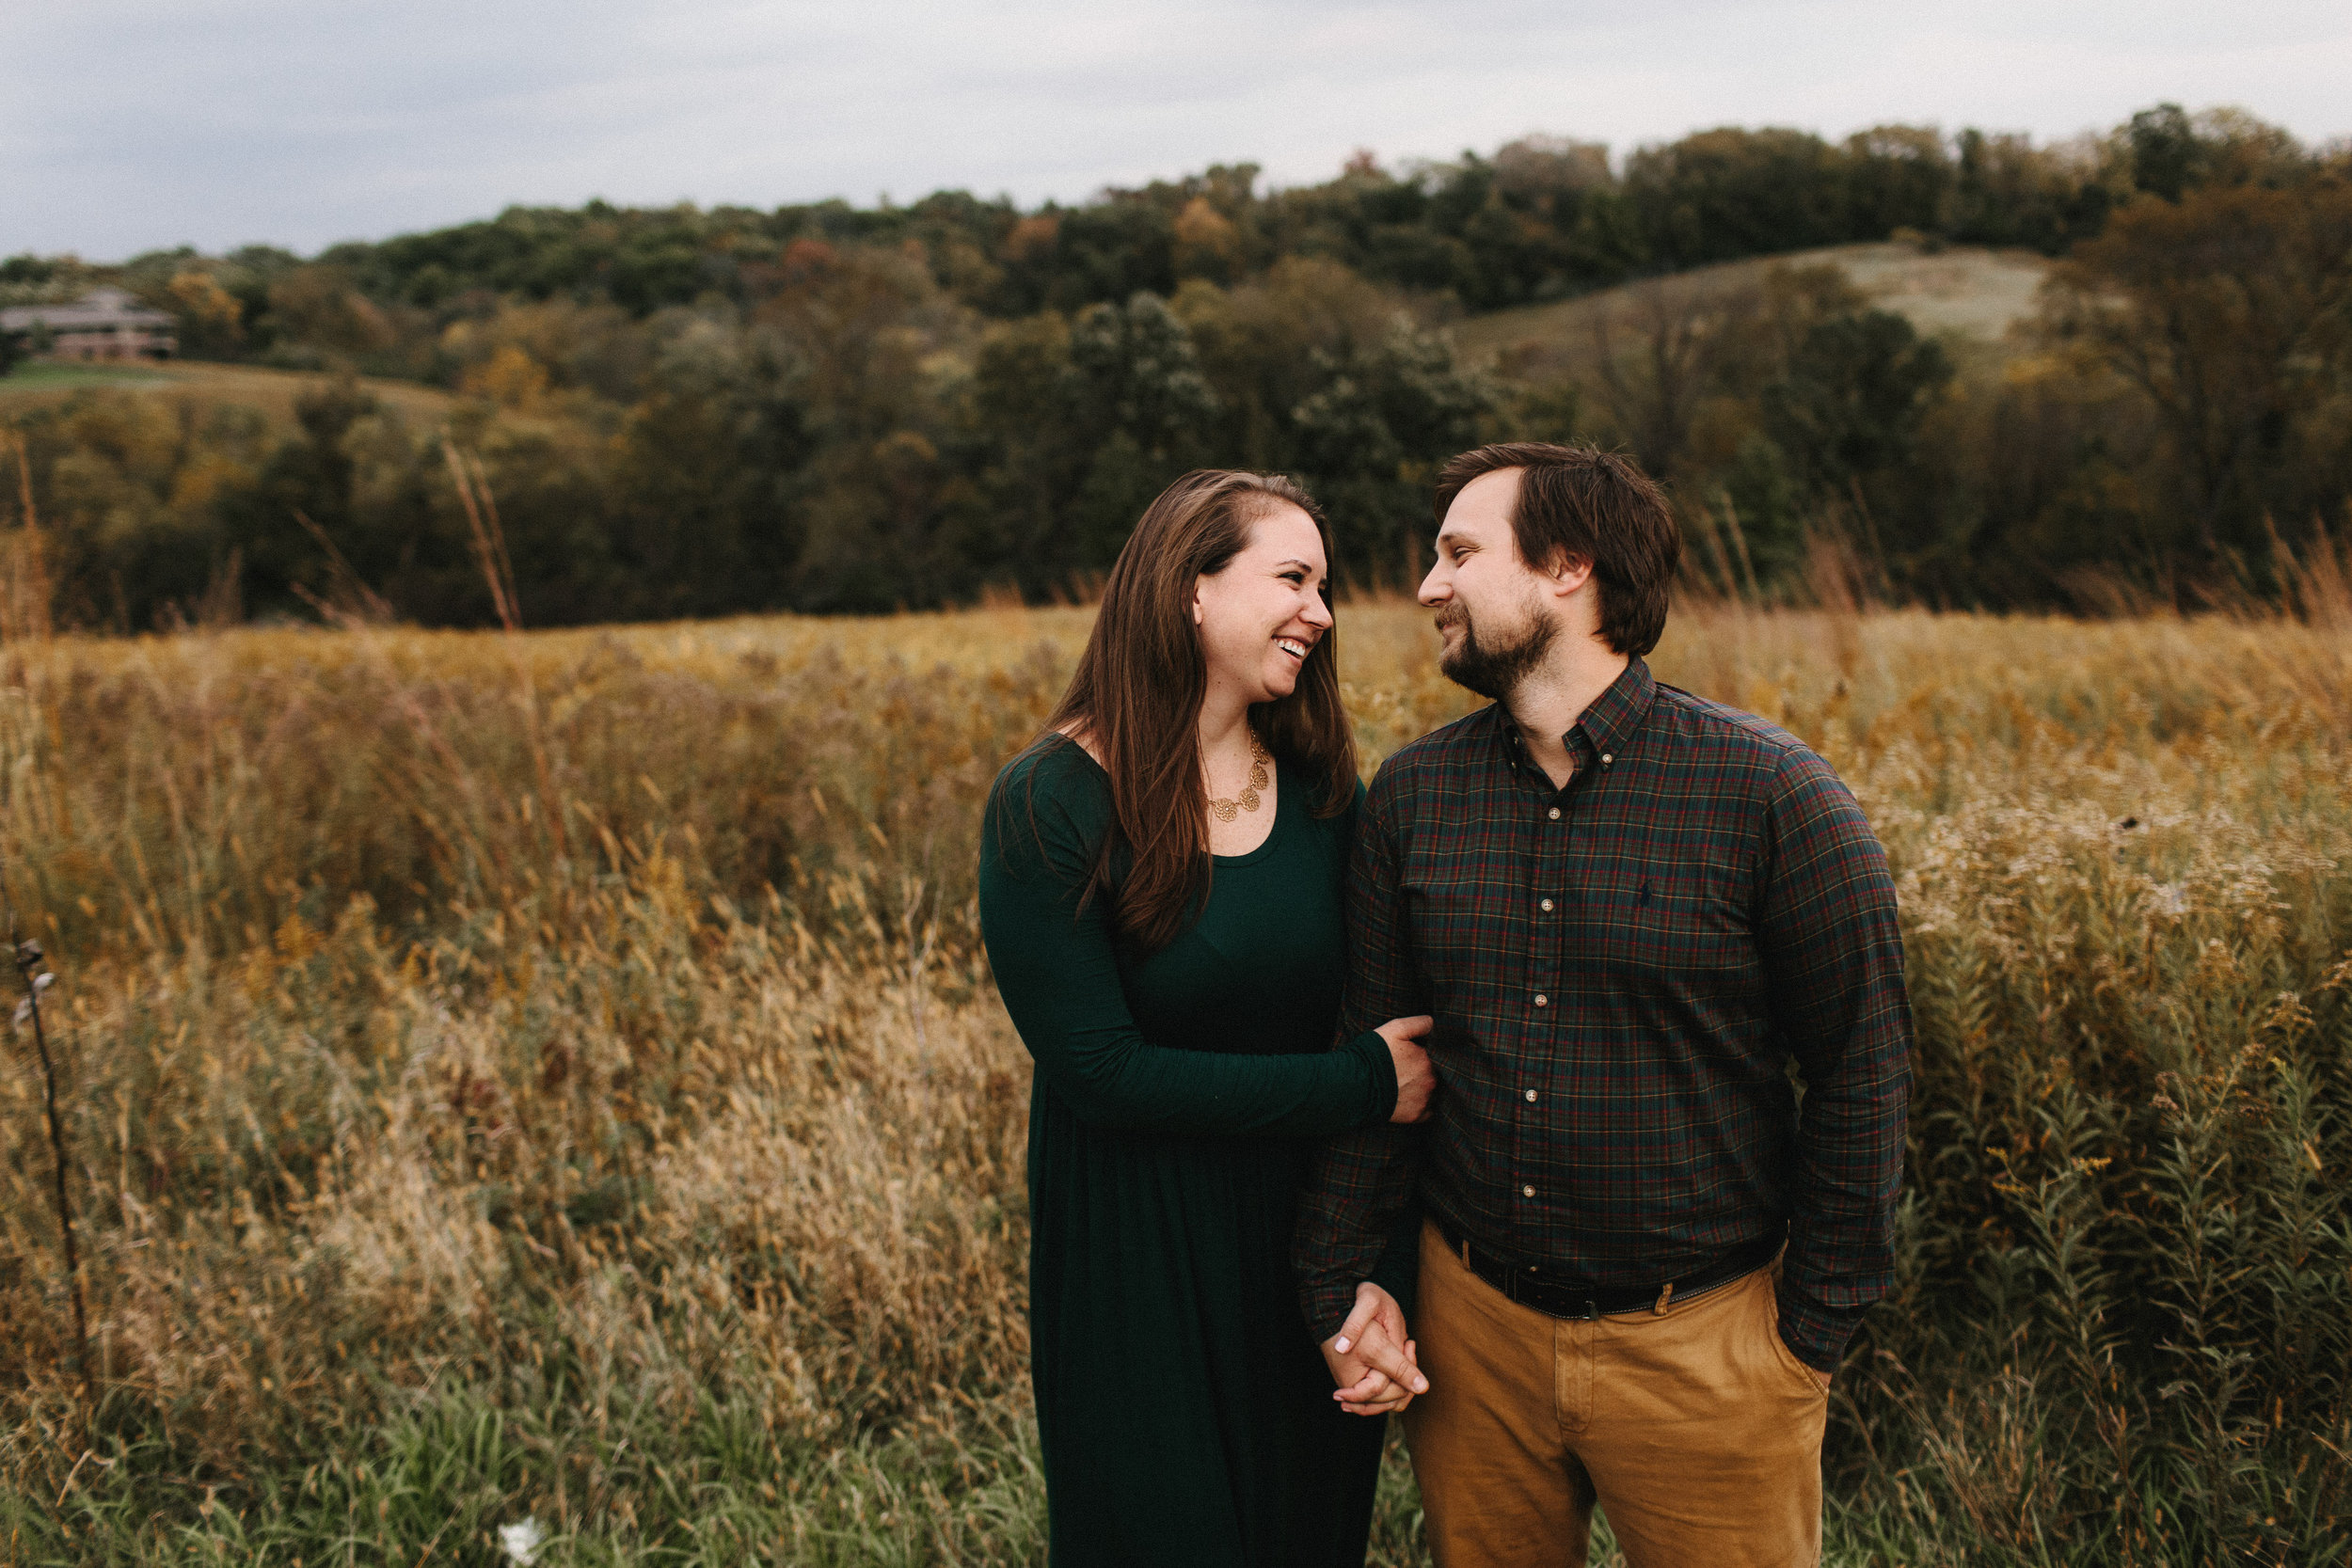 iowa_city_engagement_adventure_prairie_graduate_at_home_dog_couples_downtown_wilsons_orchard_1272.jpg